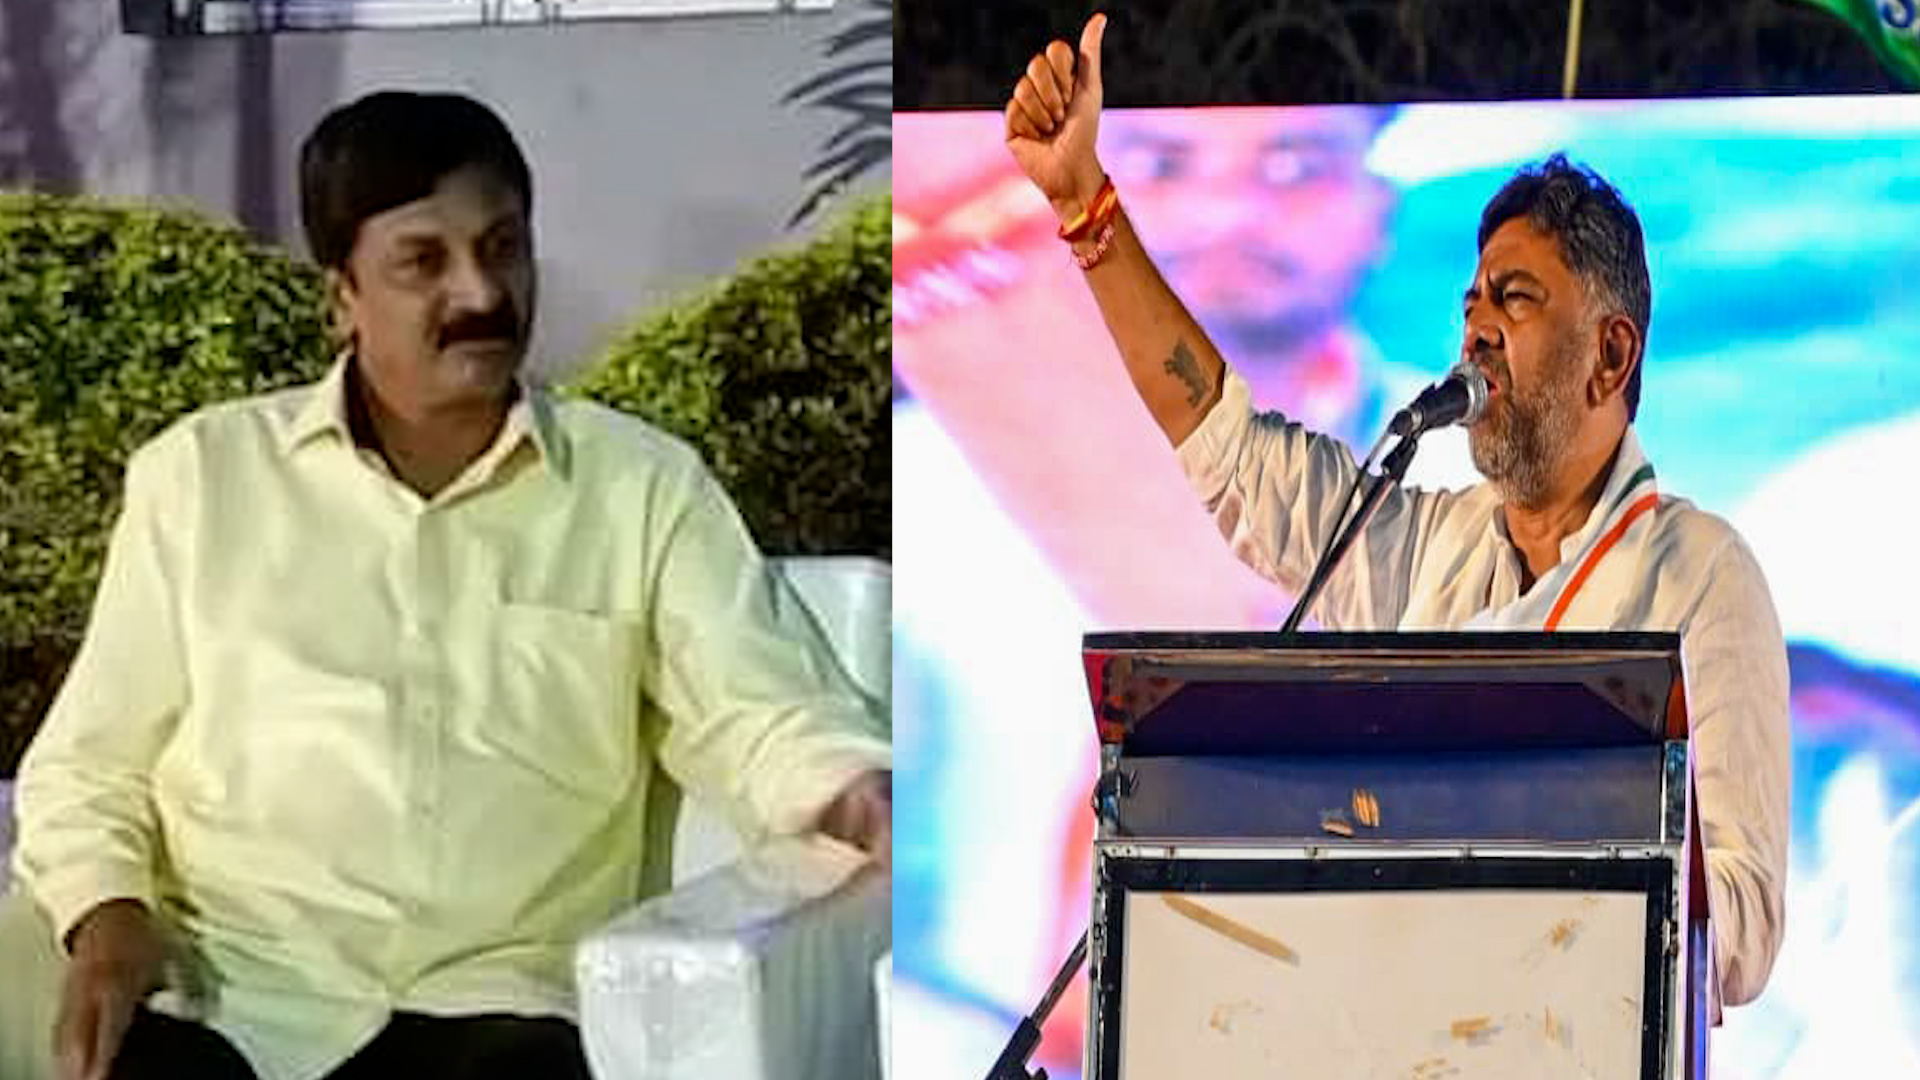 DK Shivakumar's wife told him not to leave the party for any third party: Ramesh Jarkiholi